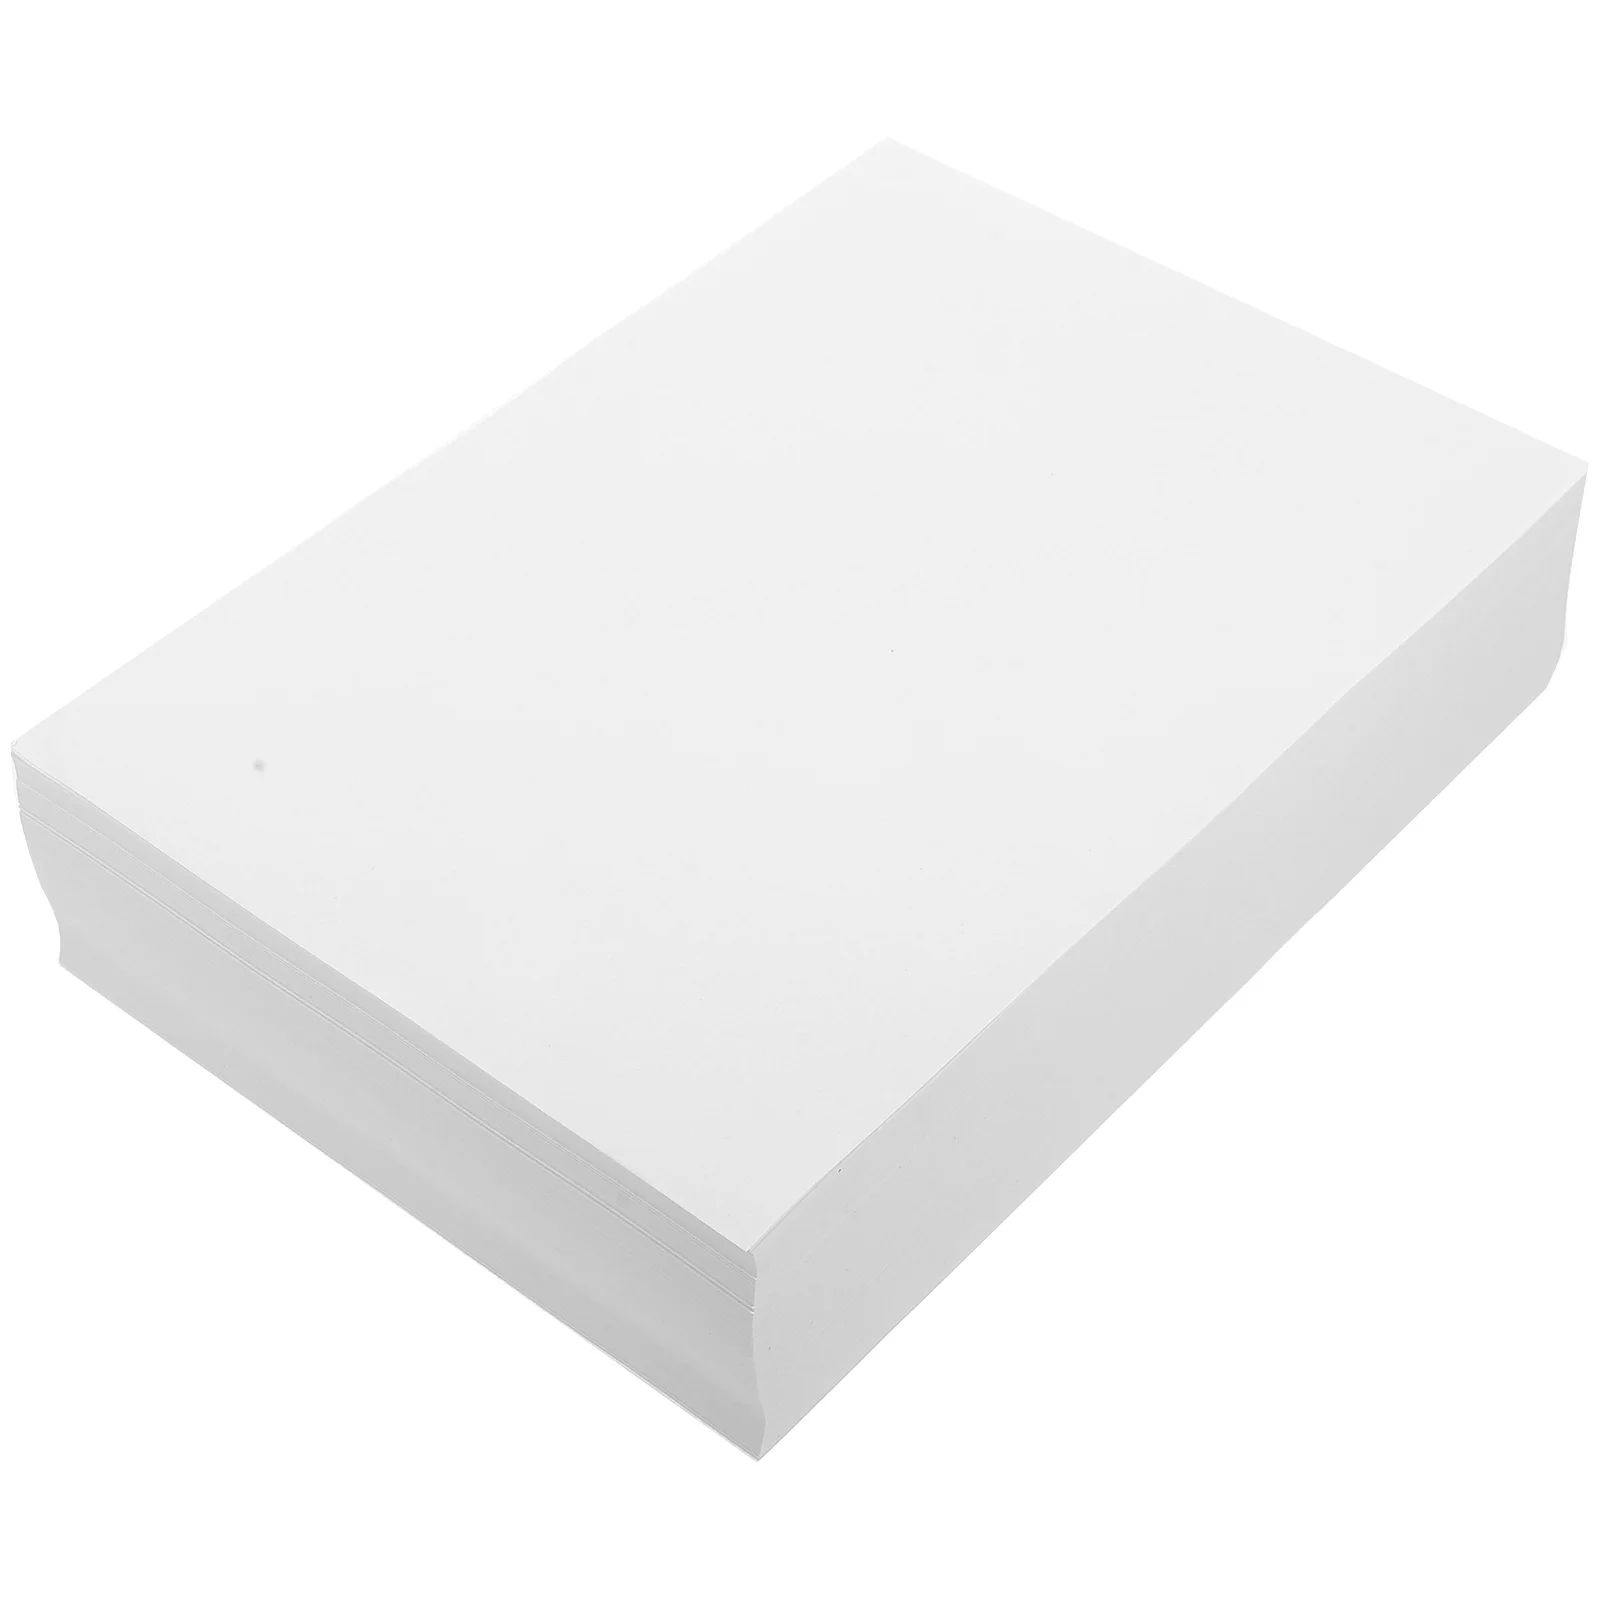 500 Sheets A5 Copy Paper Blank Printer Printing Multifunction Writing Cardboard White for Thick Crafts Painting Child DIY white cardboard 120 150 180g blank diy postcard paper 32k 16k 8k 4k a4 a3 a5 hand painted postcards white cardboard craft paper